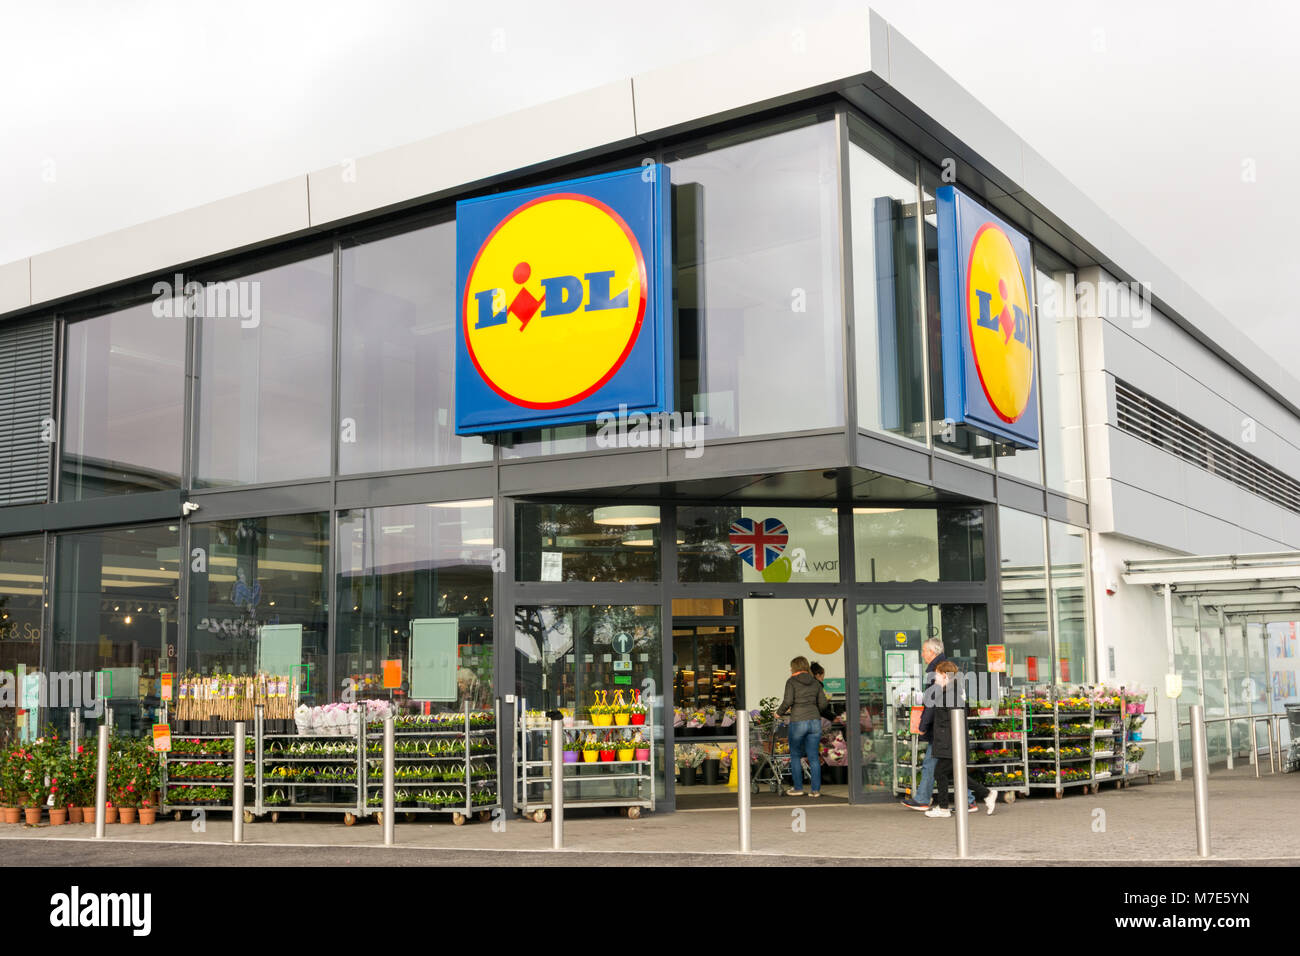 Ringwood branch of Lidl supermarket, opened in 2017 on Christchurch Road, Hampshire, UK in early spring with bedding plants on display. Stock Photo